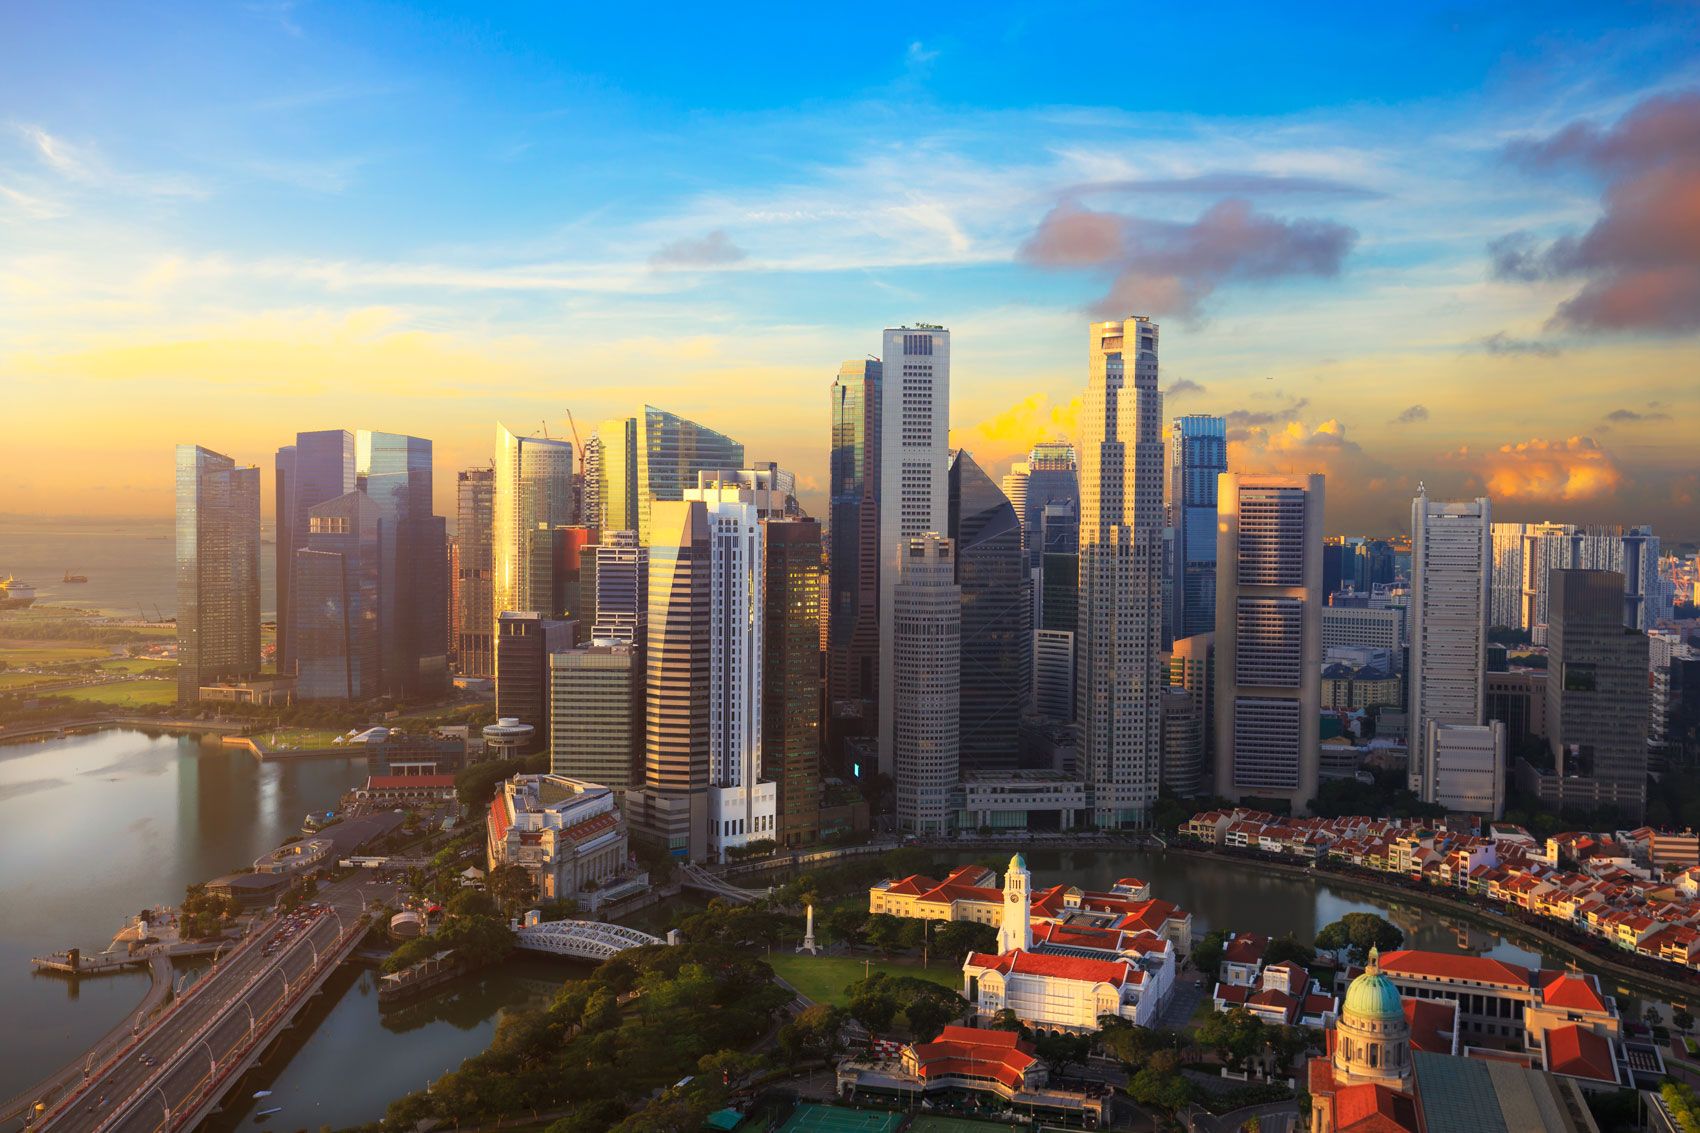 The beautiful cityscape of Singapore basked in the afternoon sun.